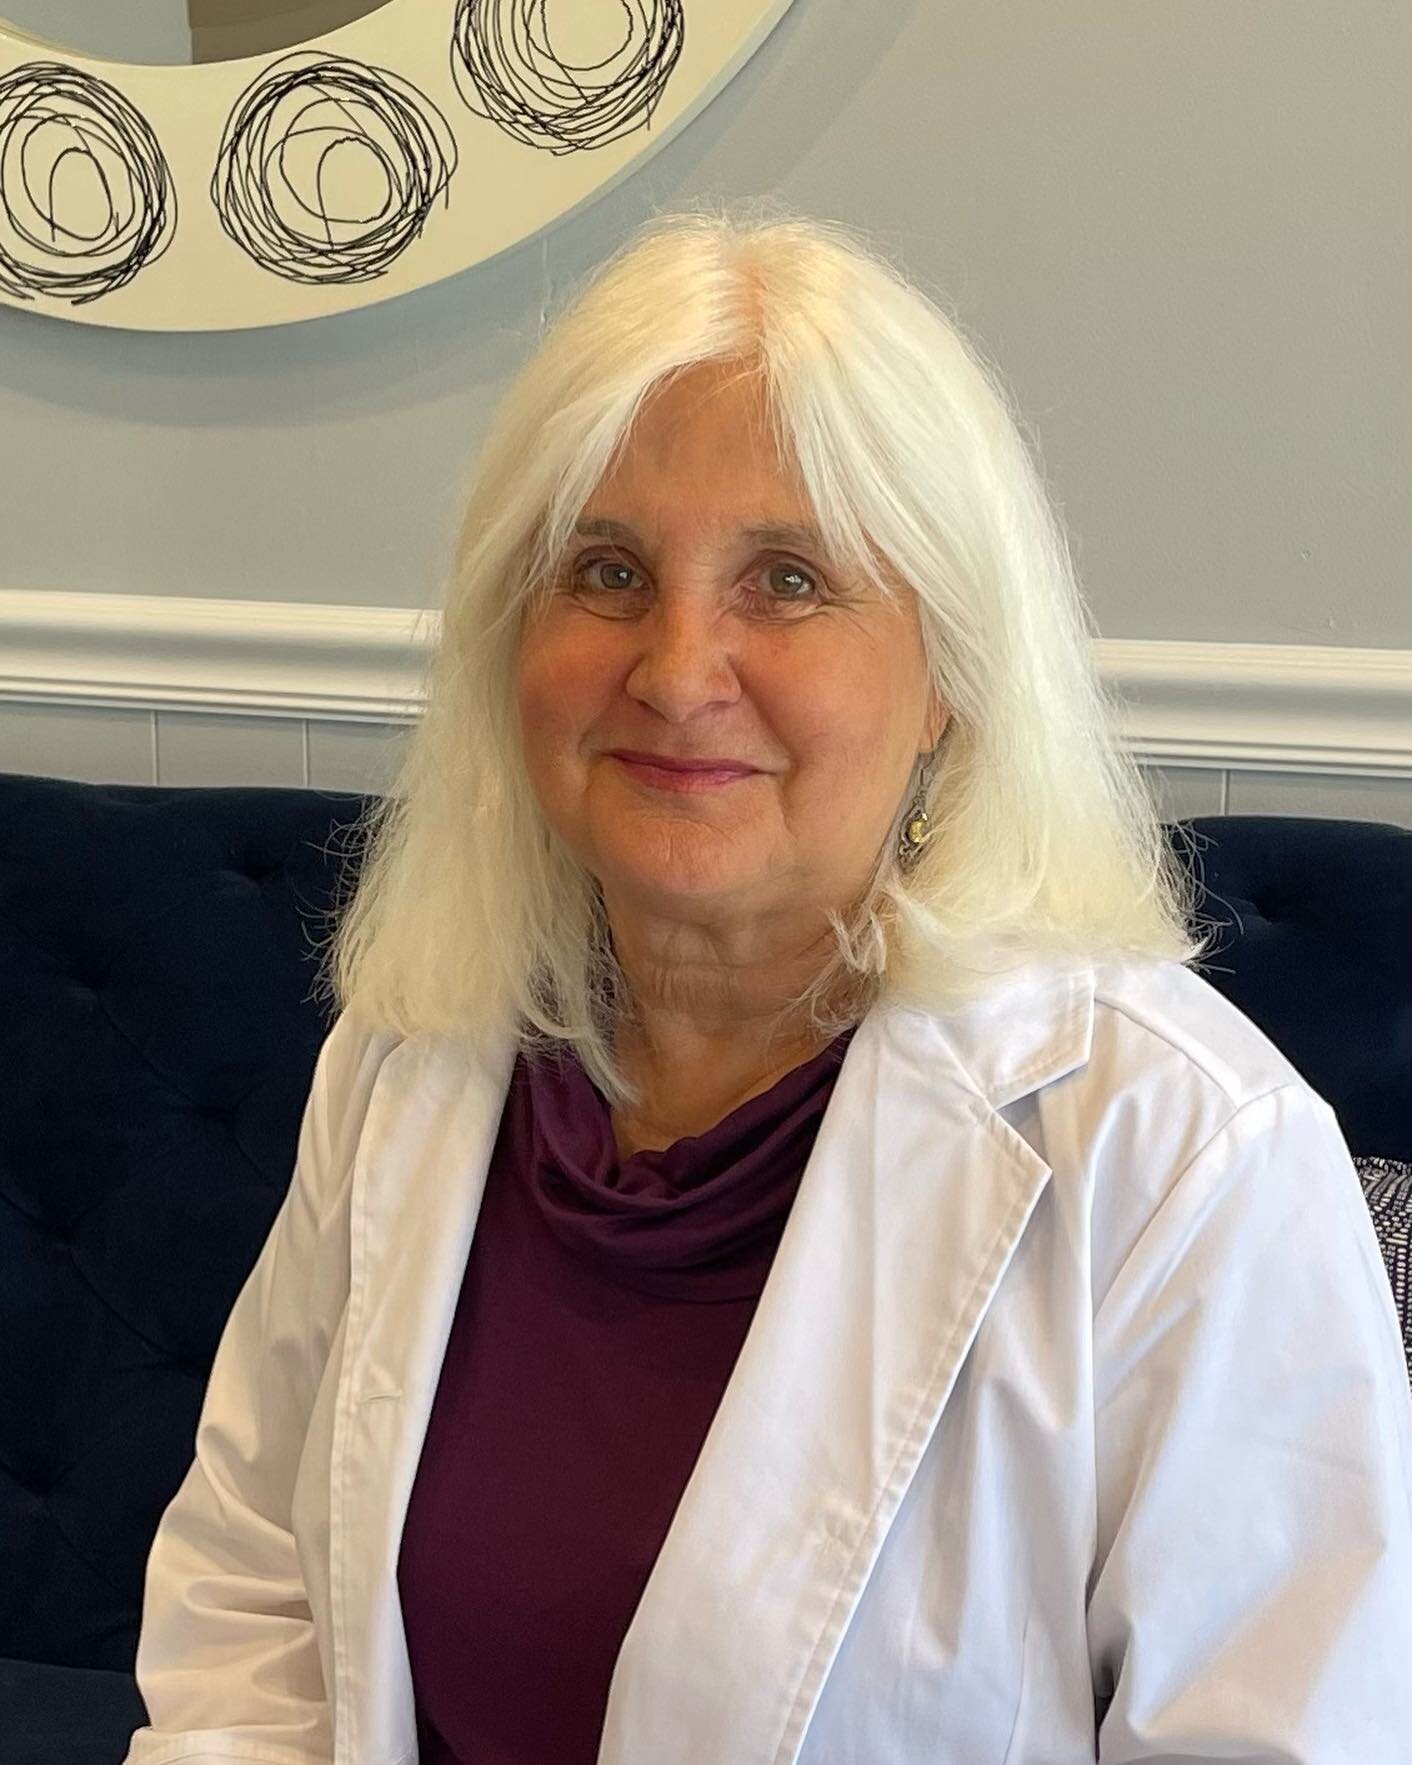 Meet Robin! Our newest Acupuncturist. With over 10 years experience in her field, Robin recently moved from the Boston area and we are so happy to have her join our team! #acupuncturist #healer #healthylifestyle #wellness #welcometothefamily #holisti